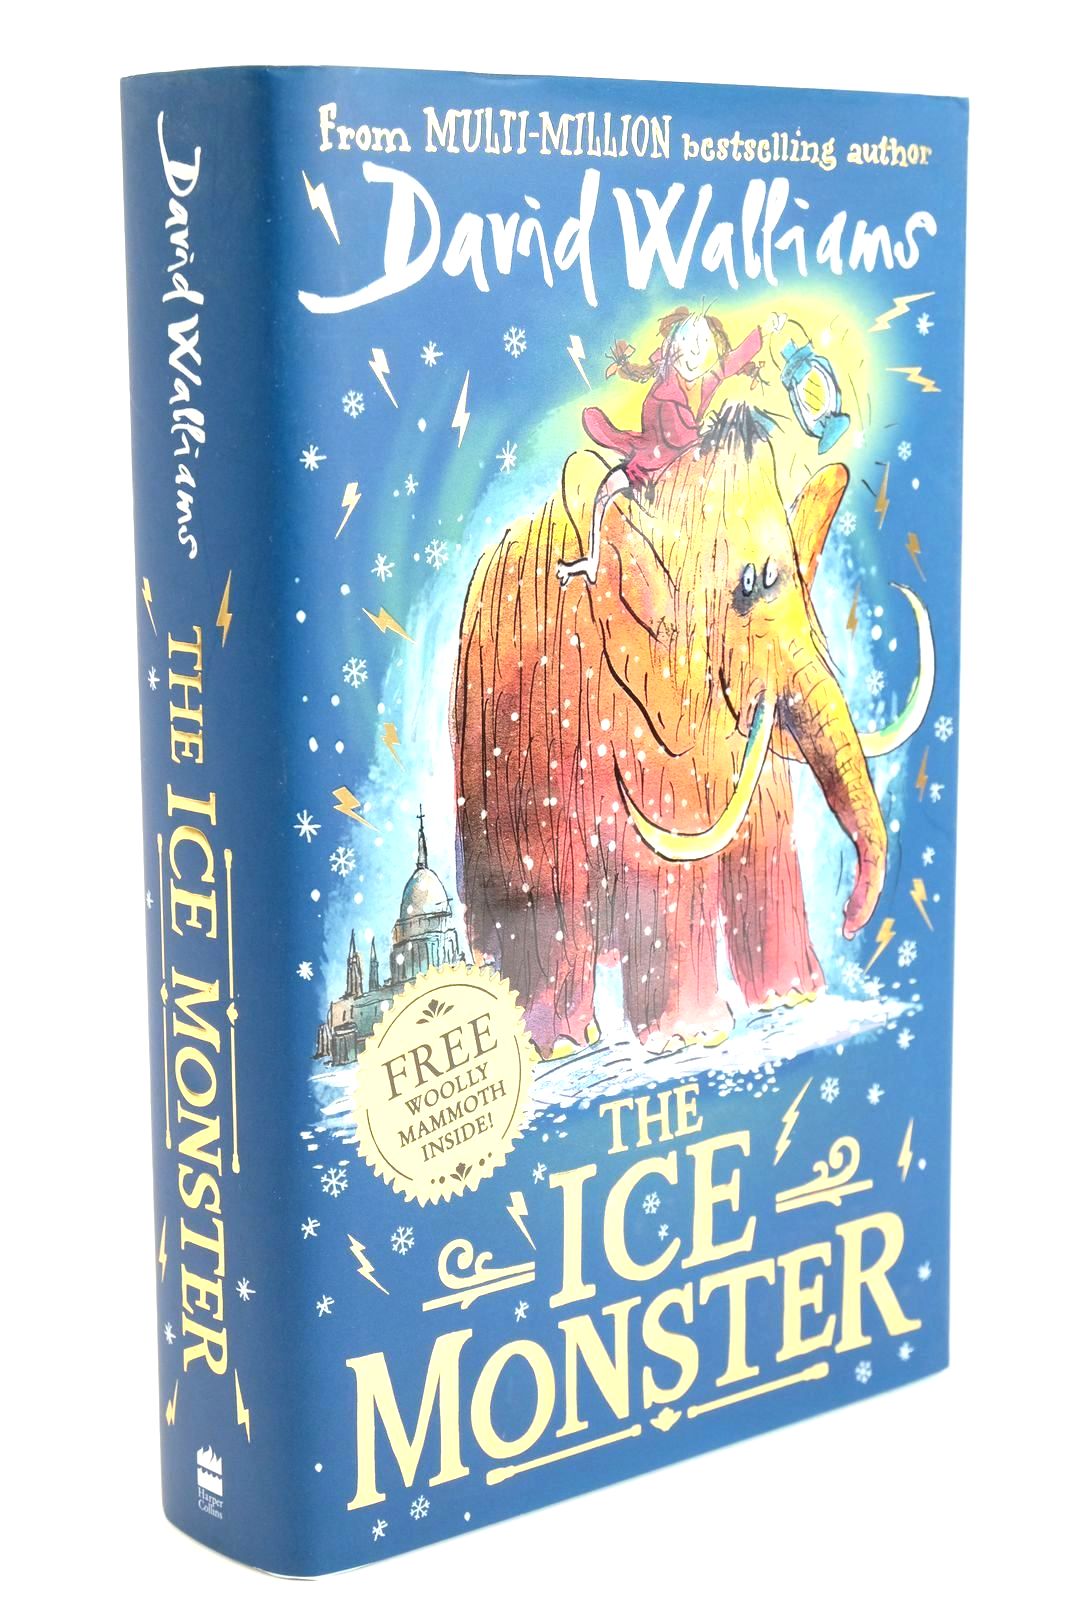 Photo of THE ICE MONSTER written by Walliams, David illustrated by Ross, Tony published by Harper Collins Childrens Books (STOCK CODE: 1323467)  for sale by Stella & Rose's Books